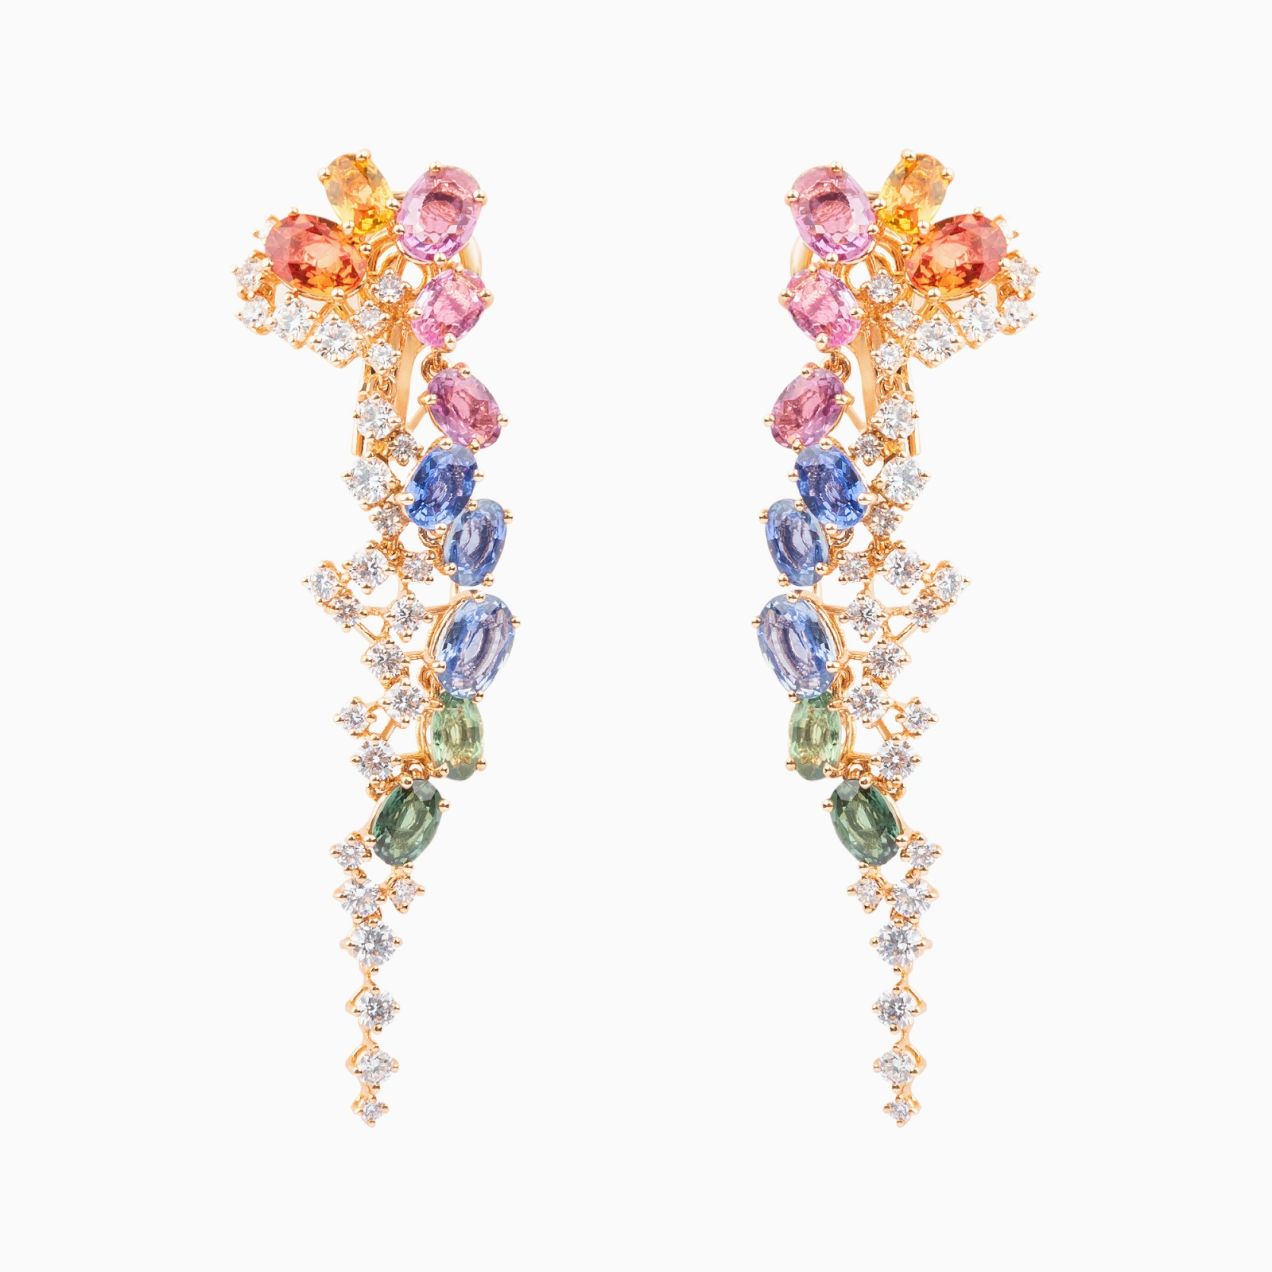 Rose gold ear cuff earrings with multicoloured sapphires and diamonds